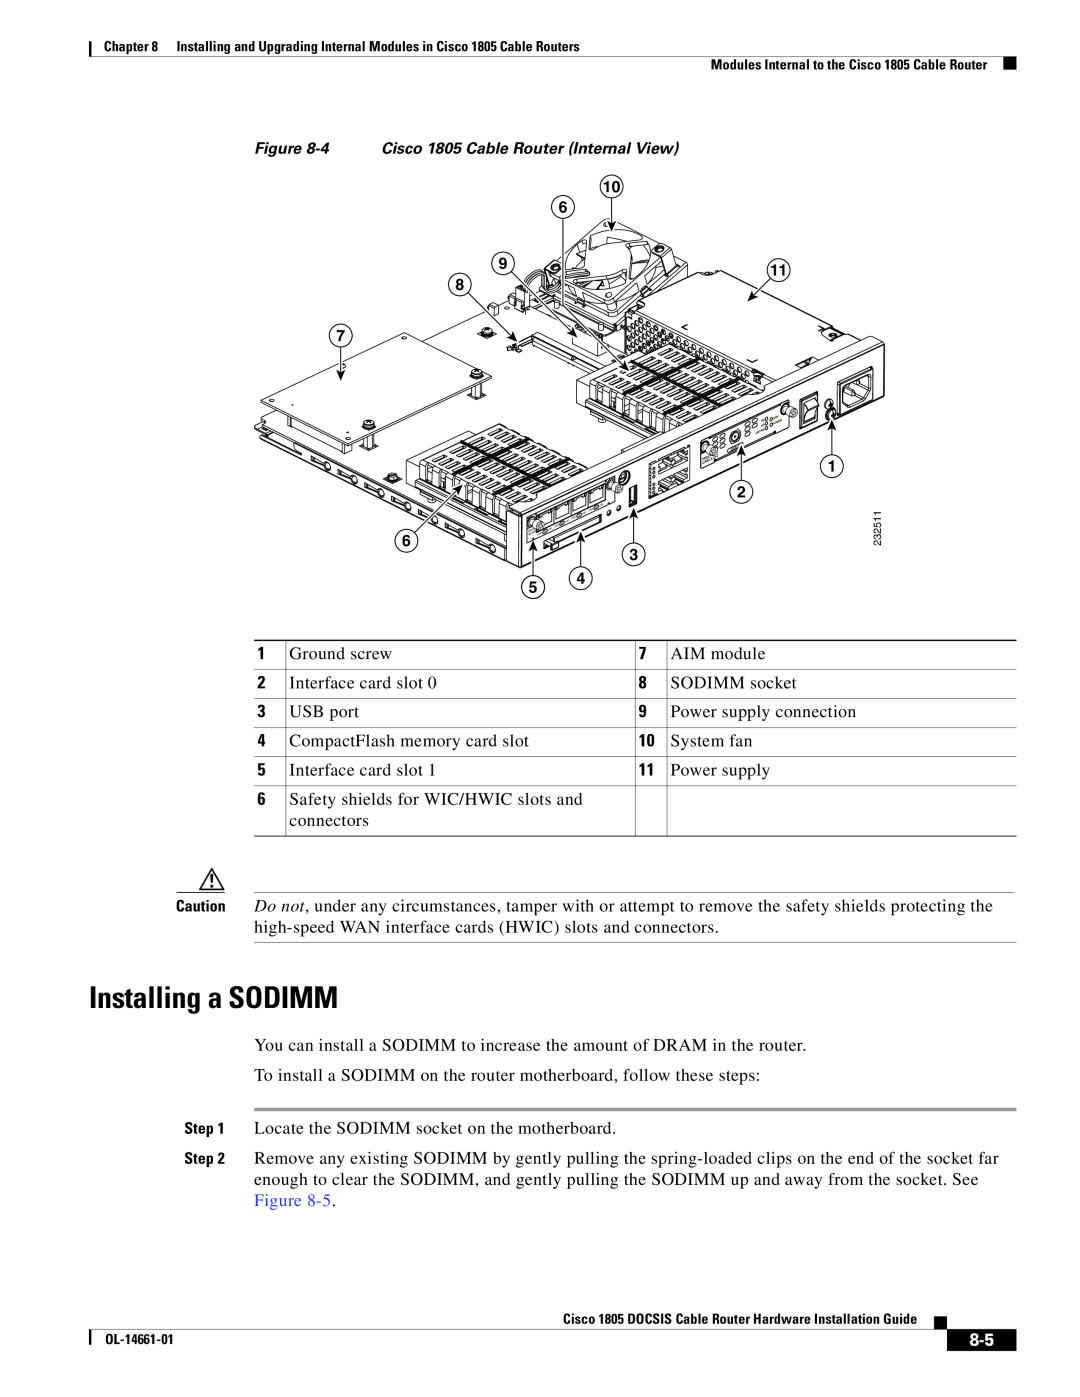 Cisco Systems manual Installing a SODIMM, 4 Cisco 1805 Cable Router Internal View 